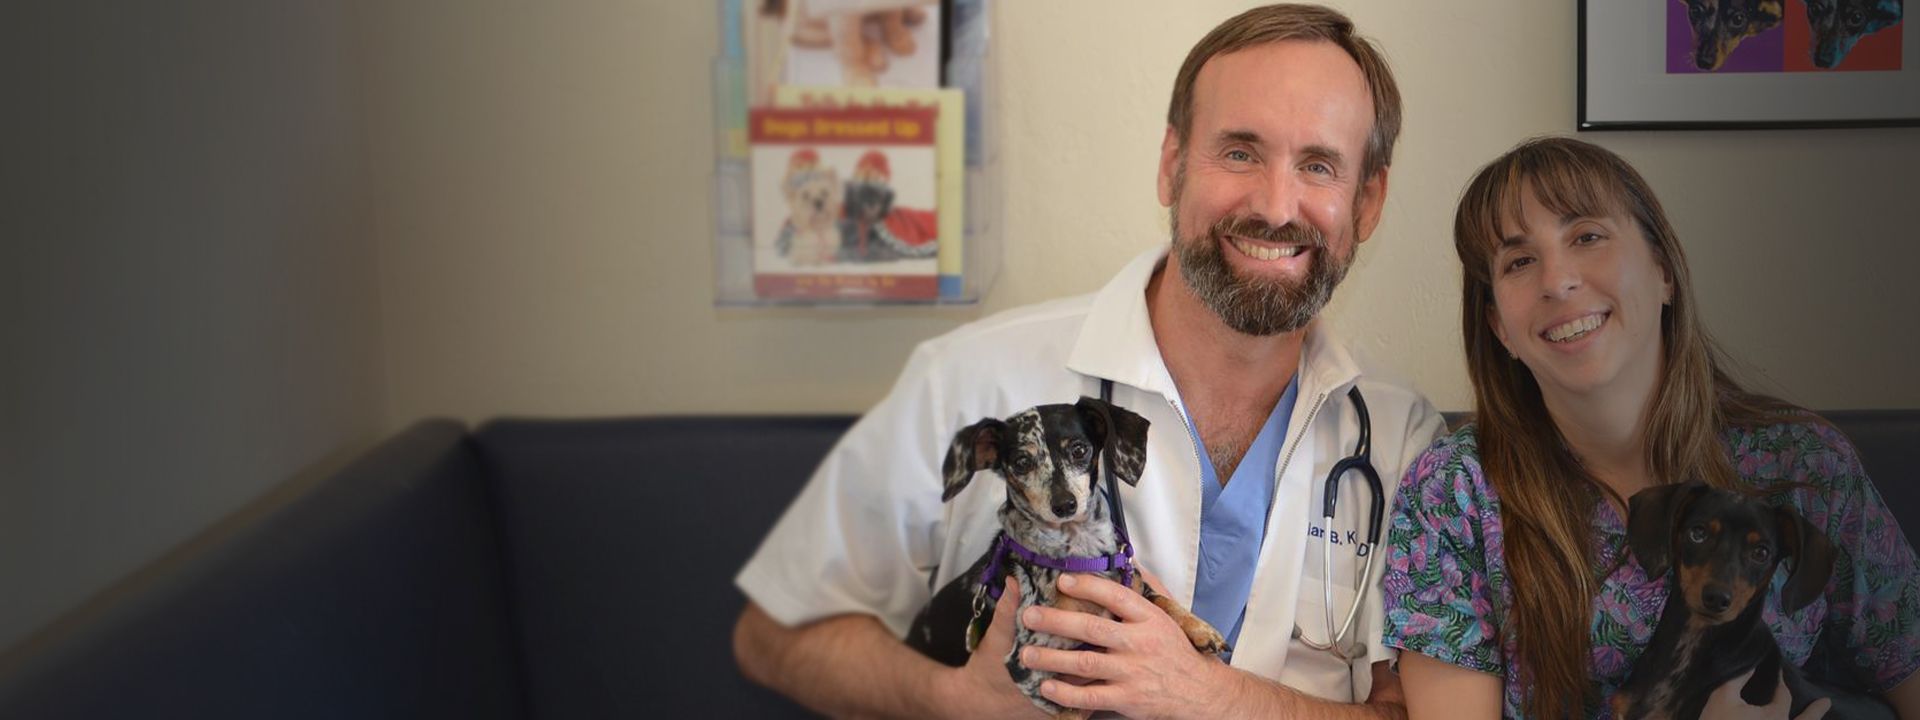 doctor ian kupkee with his dachshund dogs and a employee